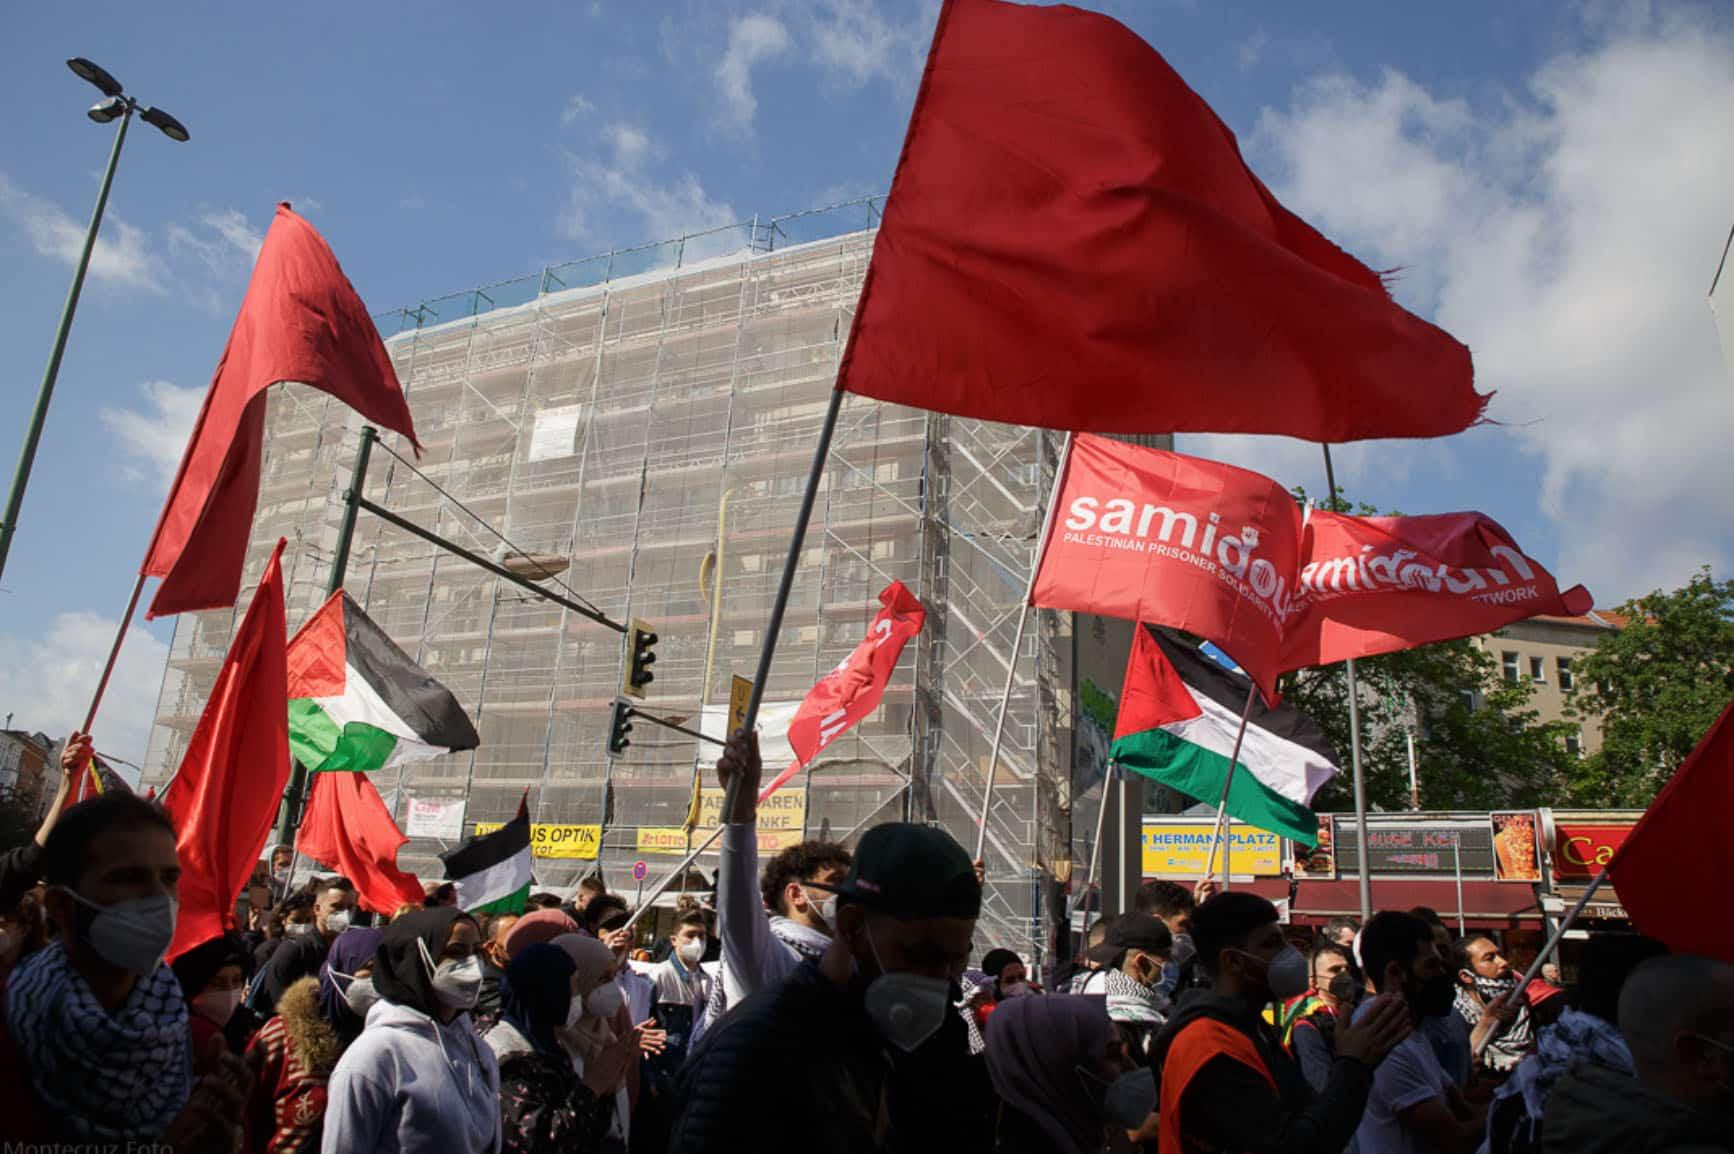 ifmat - Pro-Palestinian Org Has Ties to Iran Report Says